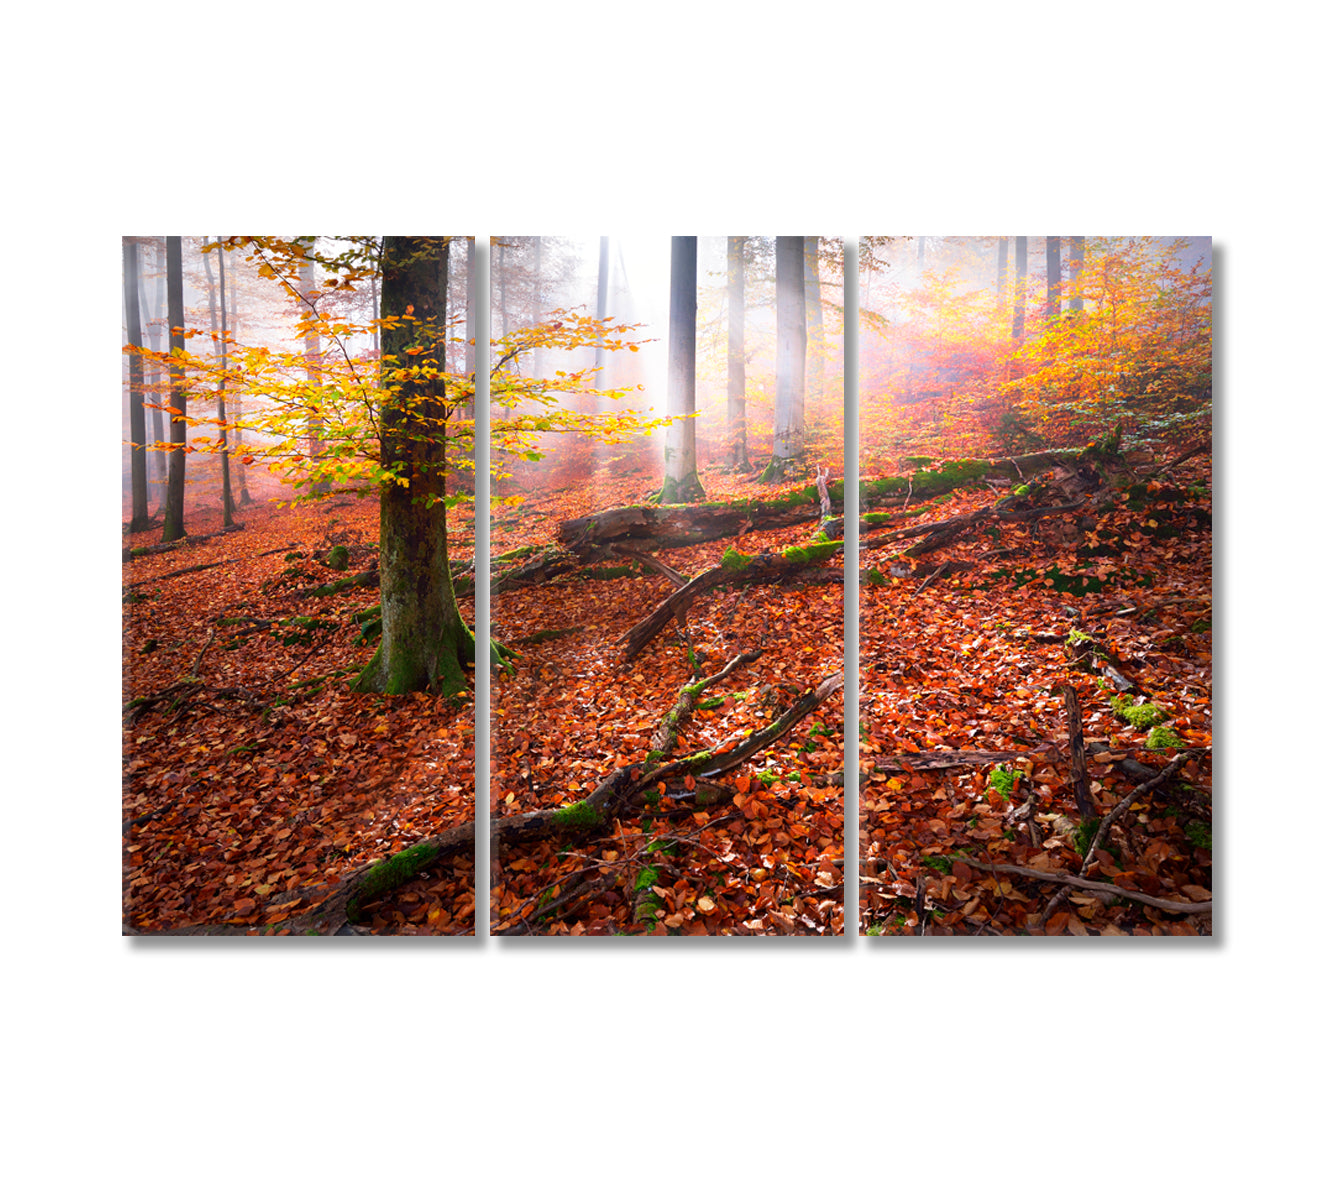 Fairy Autumn Forest with Red Leaves Canvas Print-Canvas Print-CetArt-3 Panels-36x24 inches-CetArt